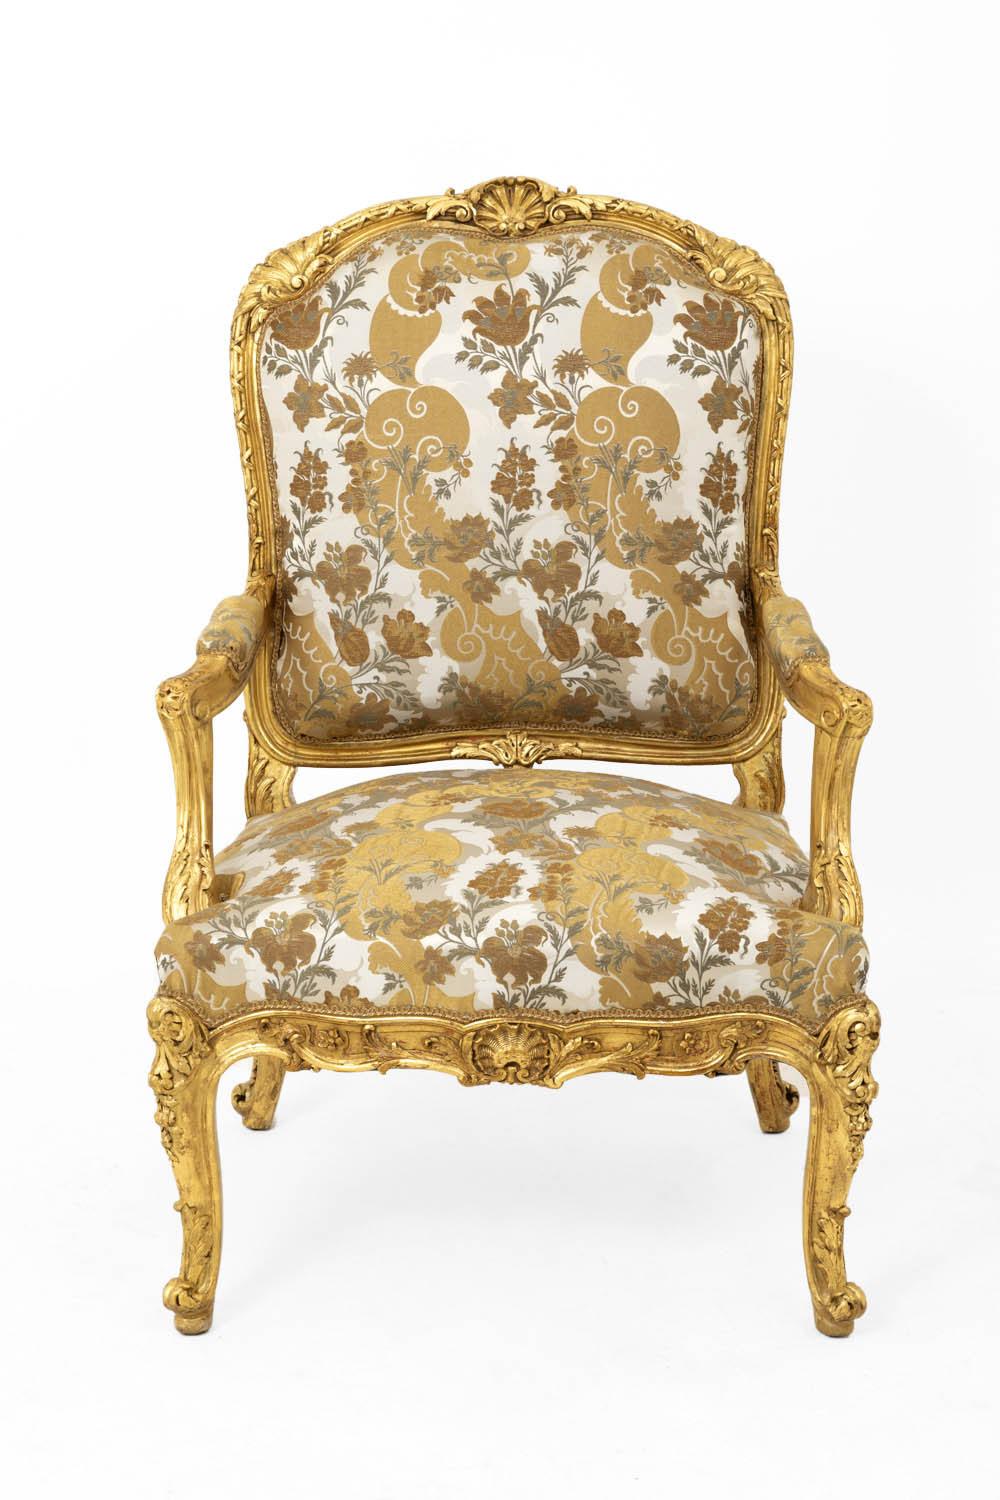 Louis XV style à la Reine armchair in giltwood standing on four cabriole legs with a decor of rocaille cartouche and acanthus leaves. Scalloped apron adorned with flowers, acanthus leaves and central shell. Arms supports slightly behind the leg line